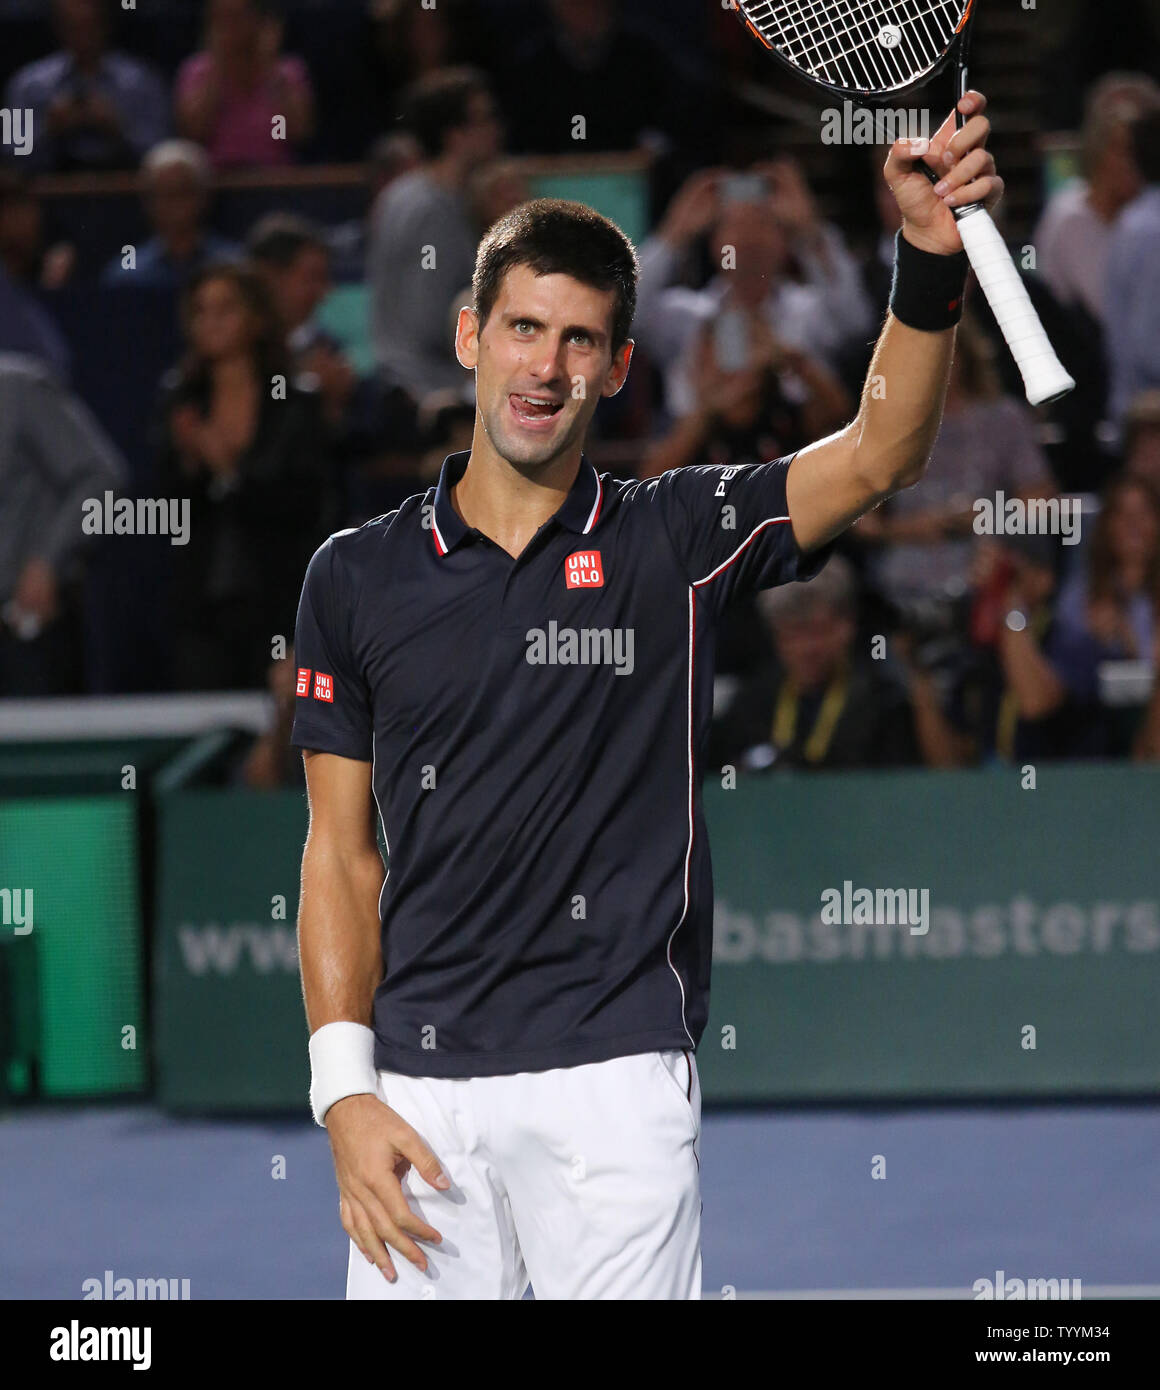 Novak Djokovic of Serbia acknowledges the crowd after winning his finals  match against Milos Raonic of Canada at the BNP Paribas Masters in Paris on  November 2, 2014. Djokovic defeated Raonic 6-2,